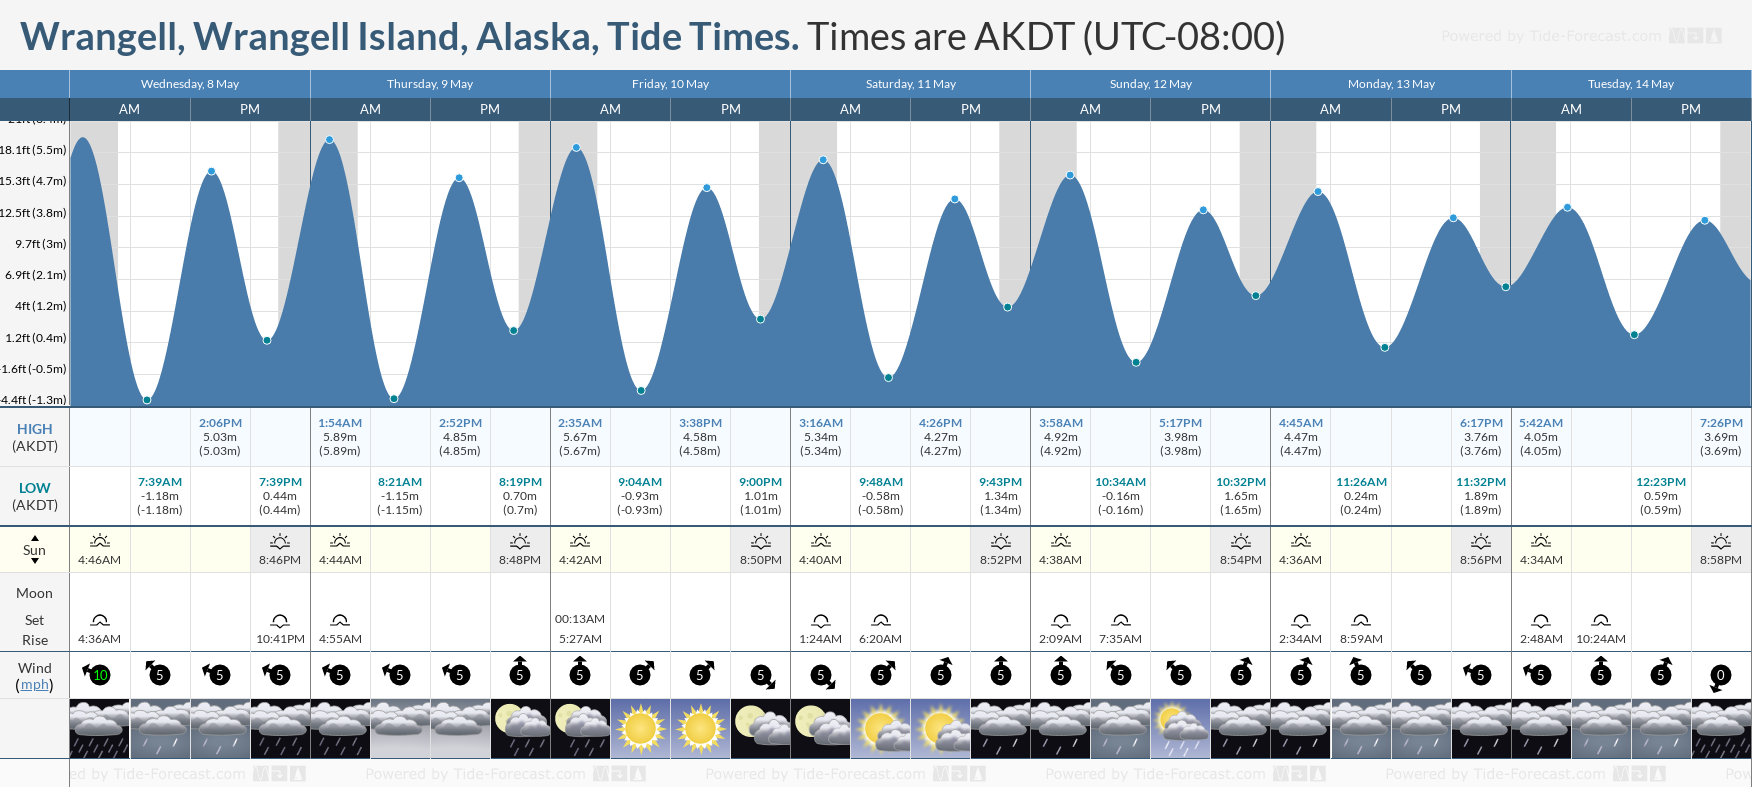 Wrangell, Wrangell Island, Alaska Tide Chart including high and low tide tide times for the next 7 days